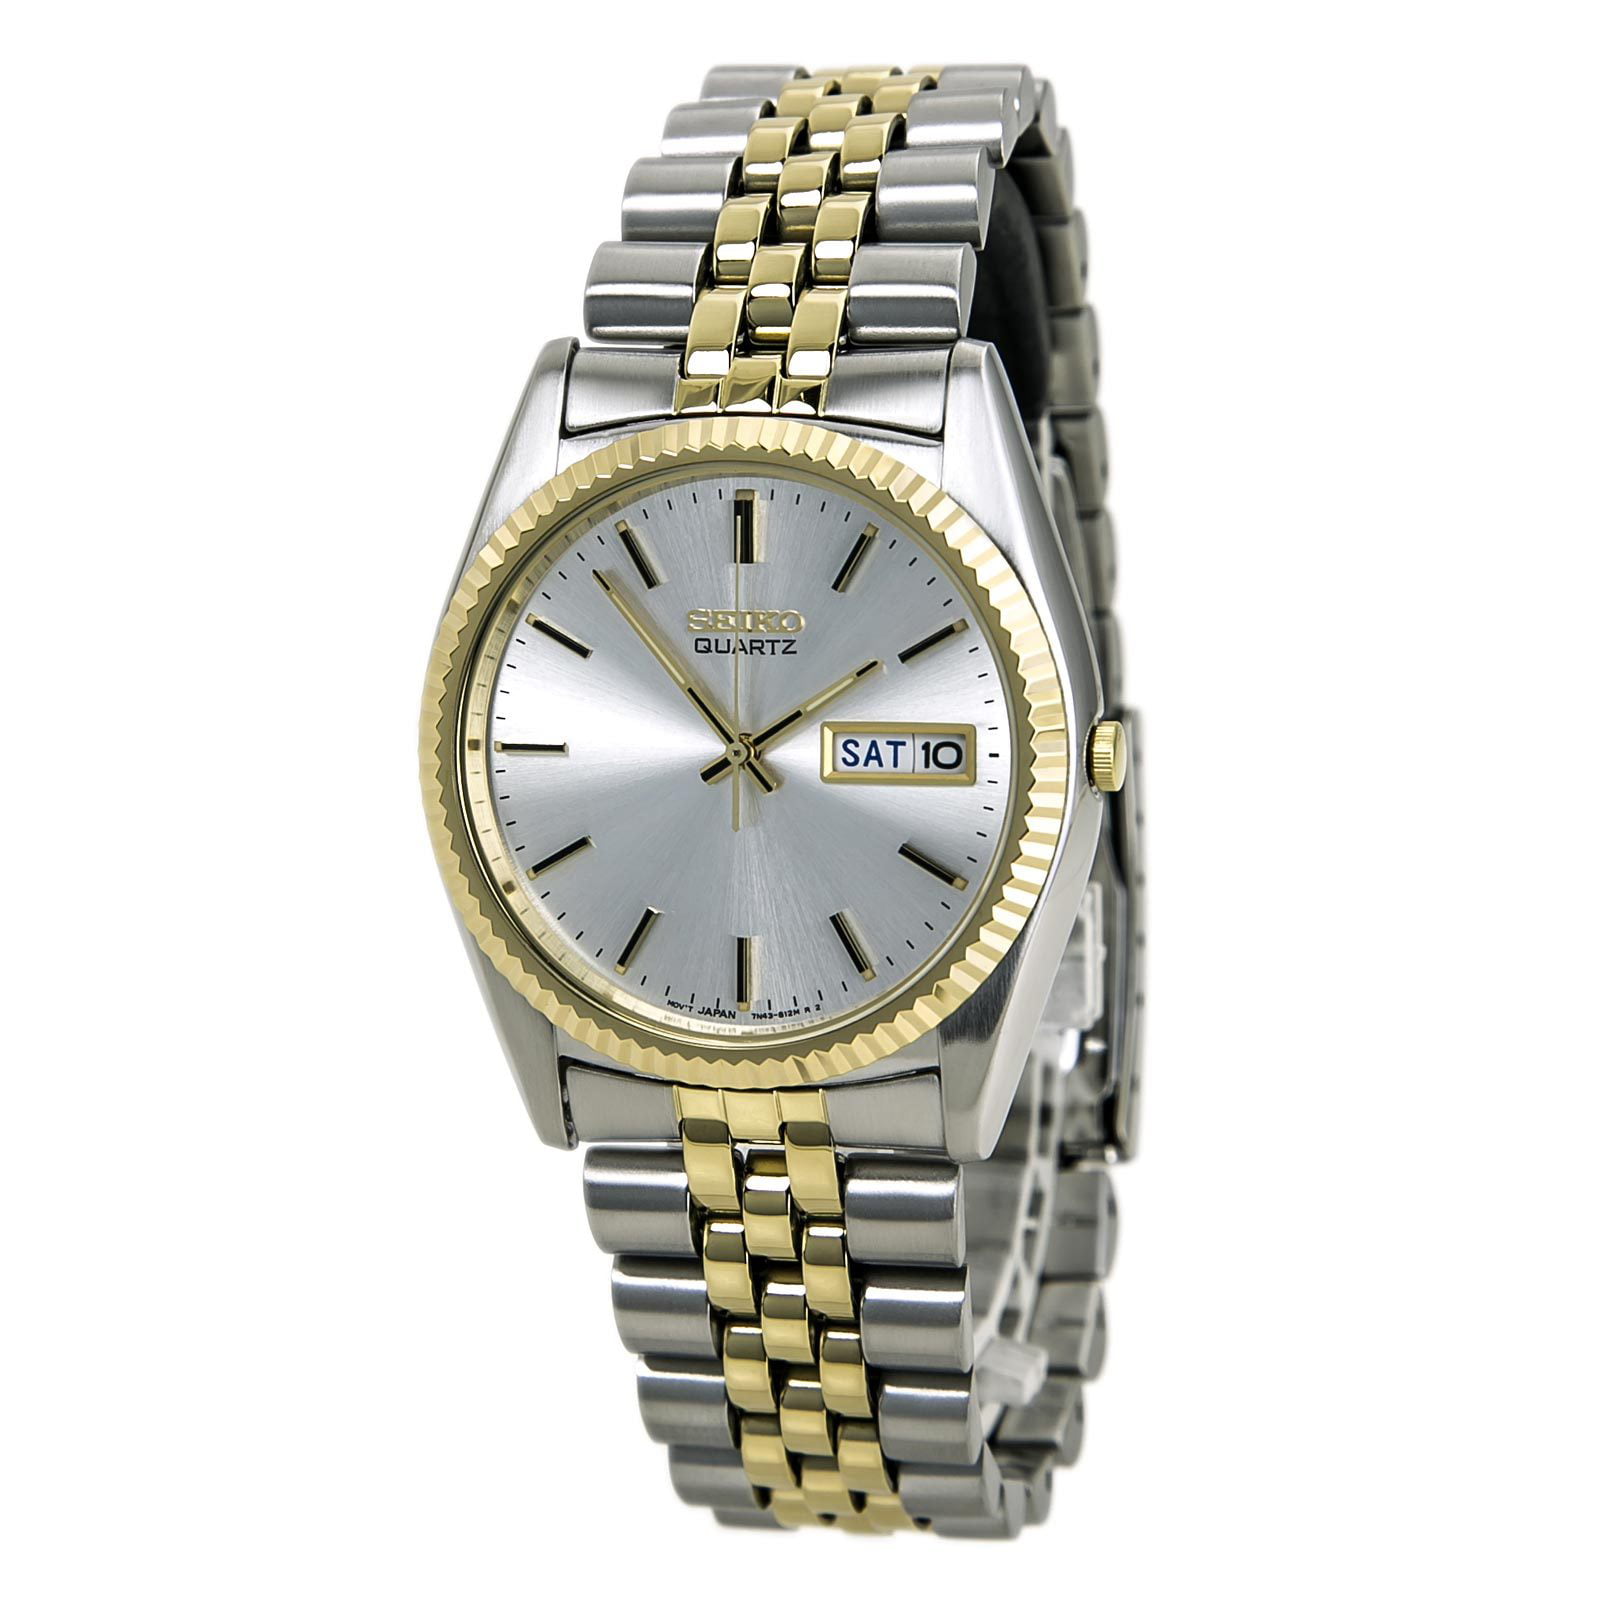 Seiko Men's Day/Date Dress Watch - Stainless and Gold Tone 